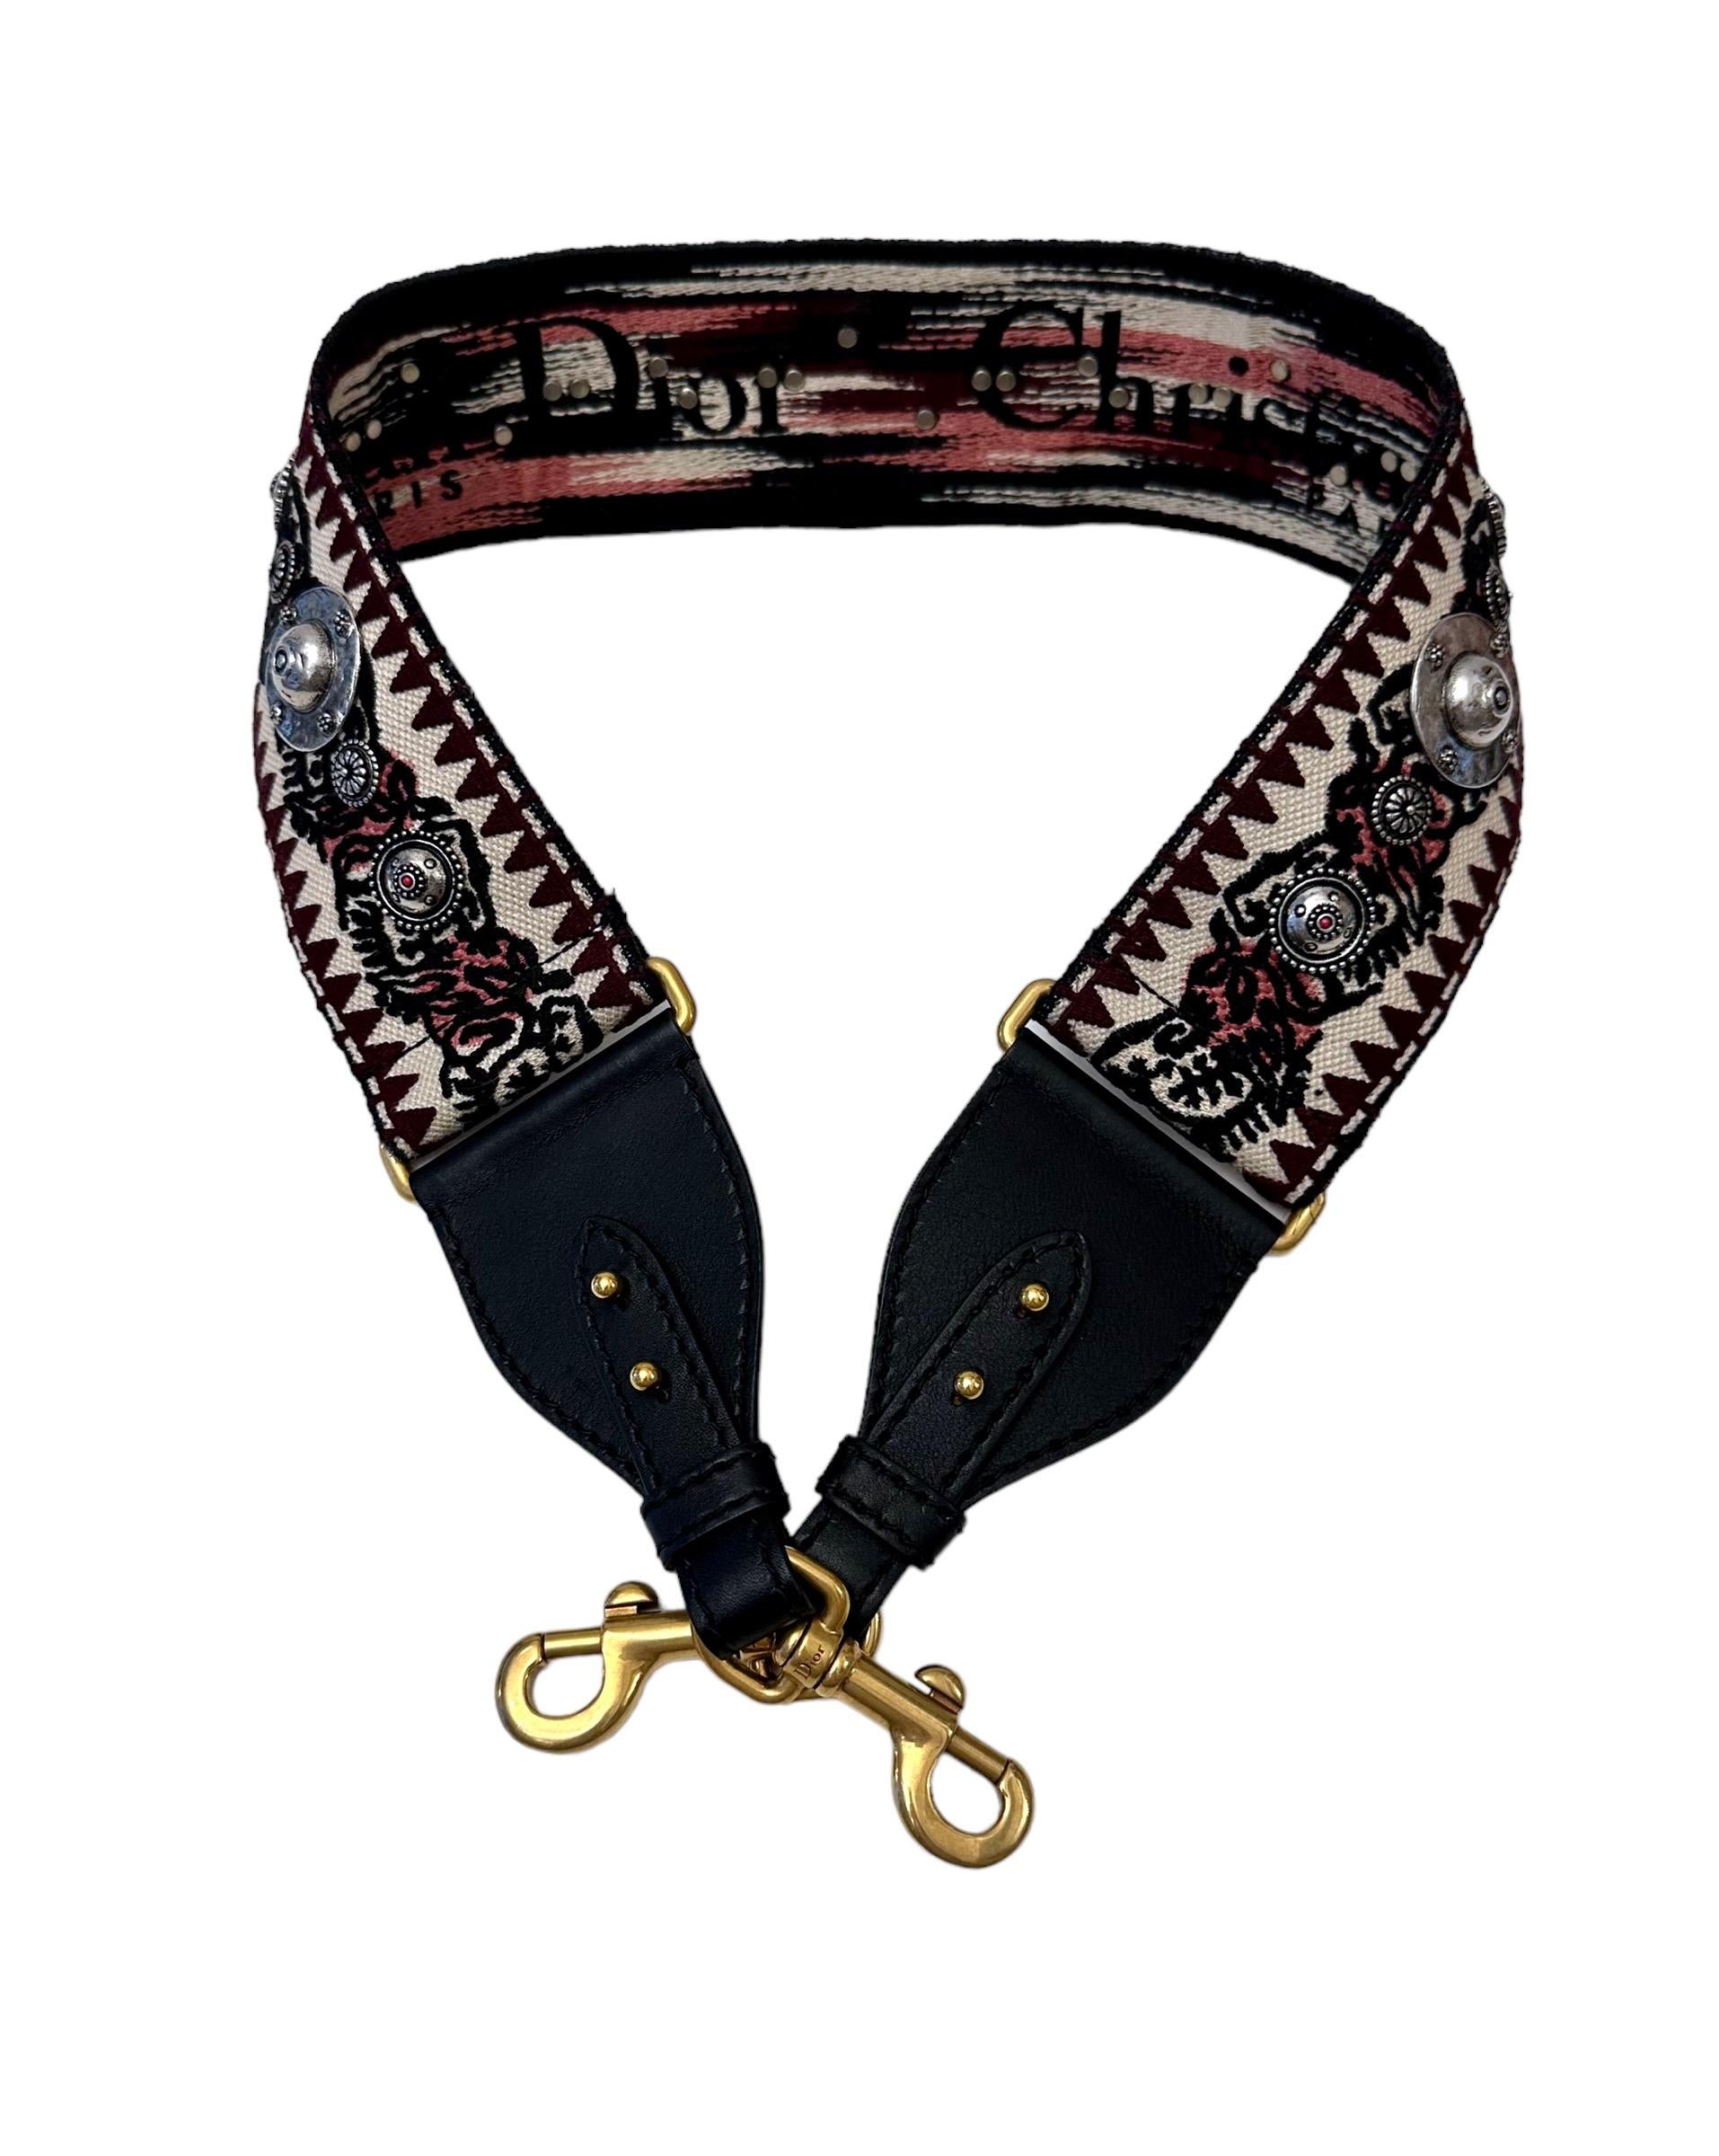 The embroidered Dior shoulder strap is a unique accessory that allows the customization of certain House bags. 
This pre-owned one features a graphic design canvas, a mix of embroidery and engraved medallions with a Christian Dior Paris signature at